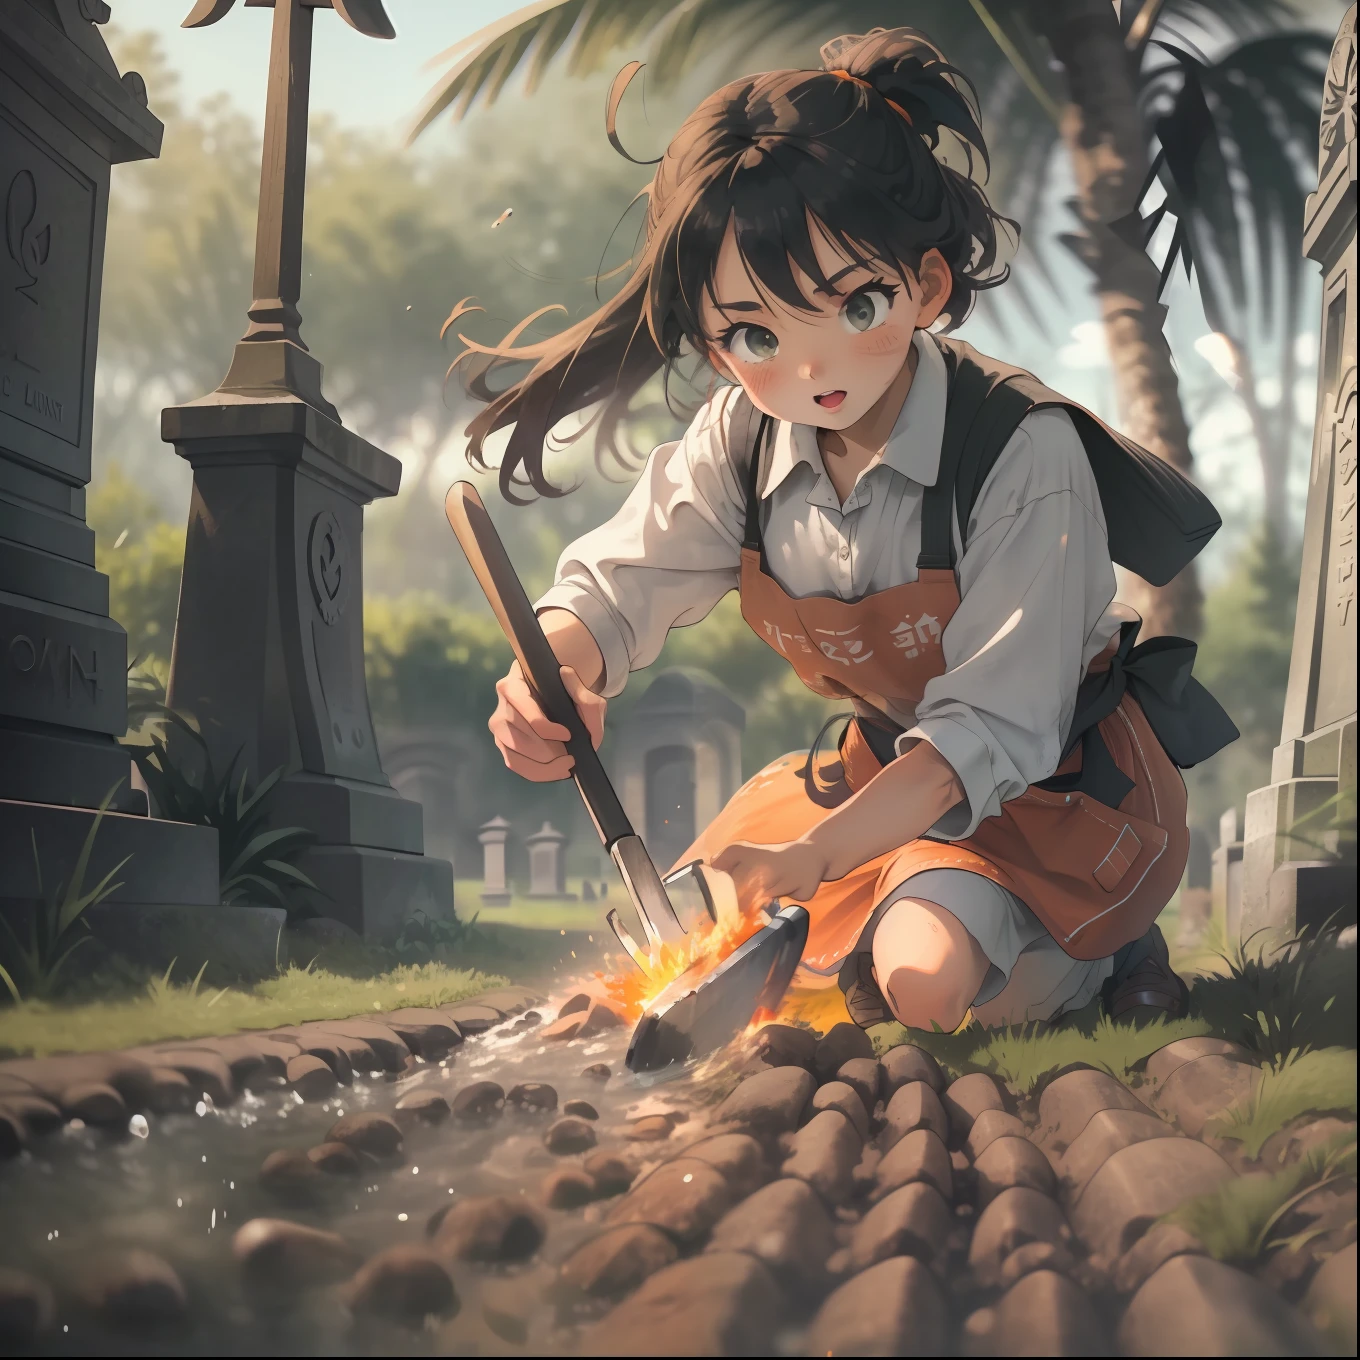 Apron girl，（Take a shovel：1.3），（Bury the salmon in the cemetery：1.5），holland angle，Fiery members，（extreme motion blur：1.2），Nice face，Detailed palm，Detailed face，The entire image composition，Natural soft light，Blur time，Morning，Storytelling images